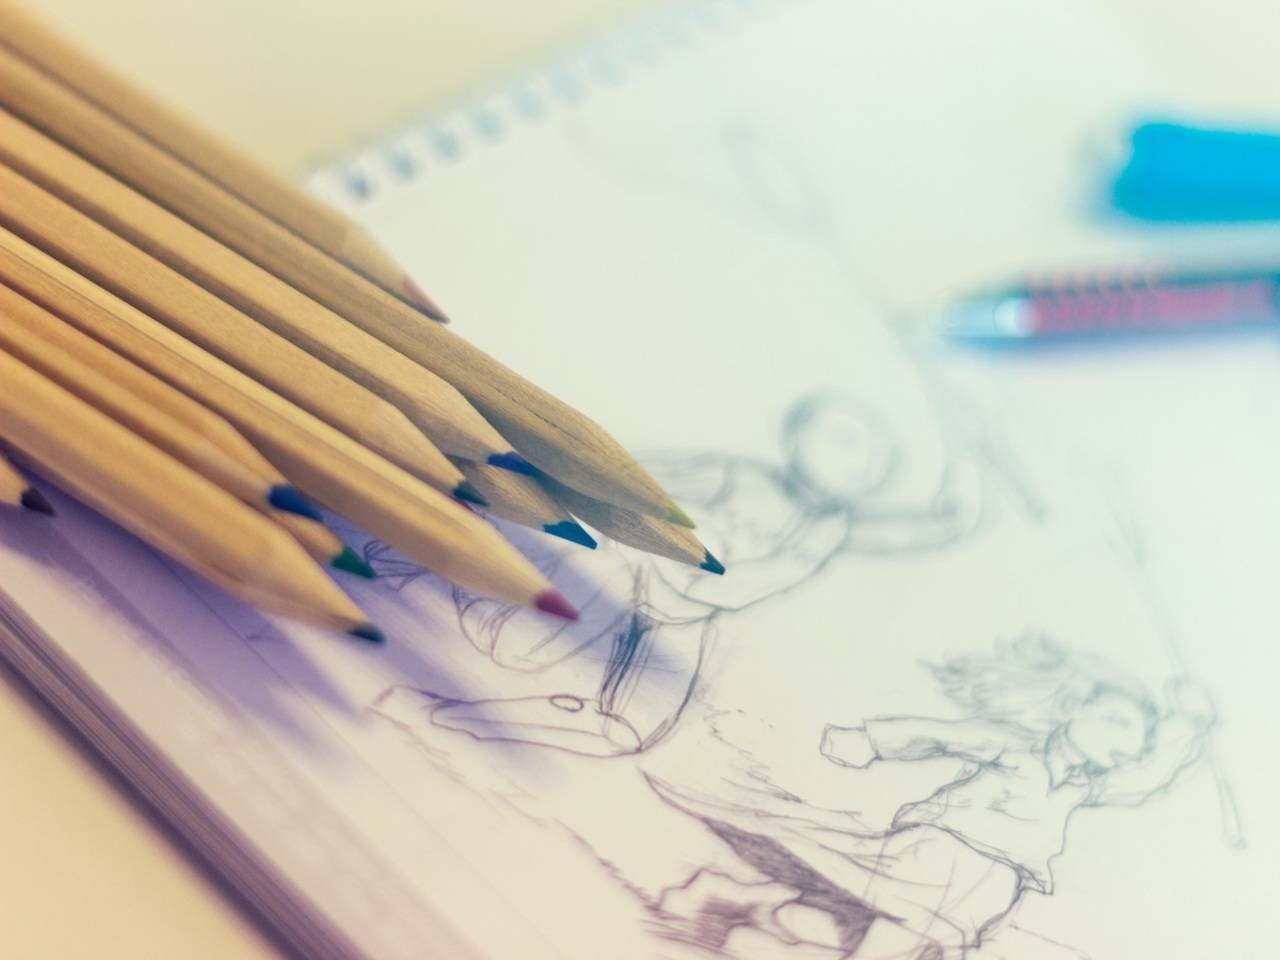 Pencil drawing techniques Pro tips to sharpen your skills  Creative Bloq